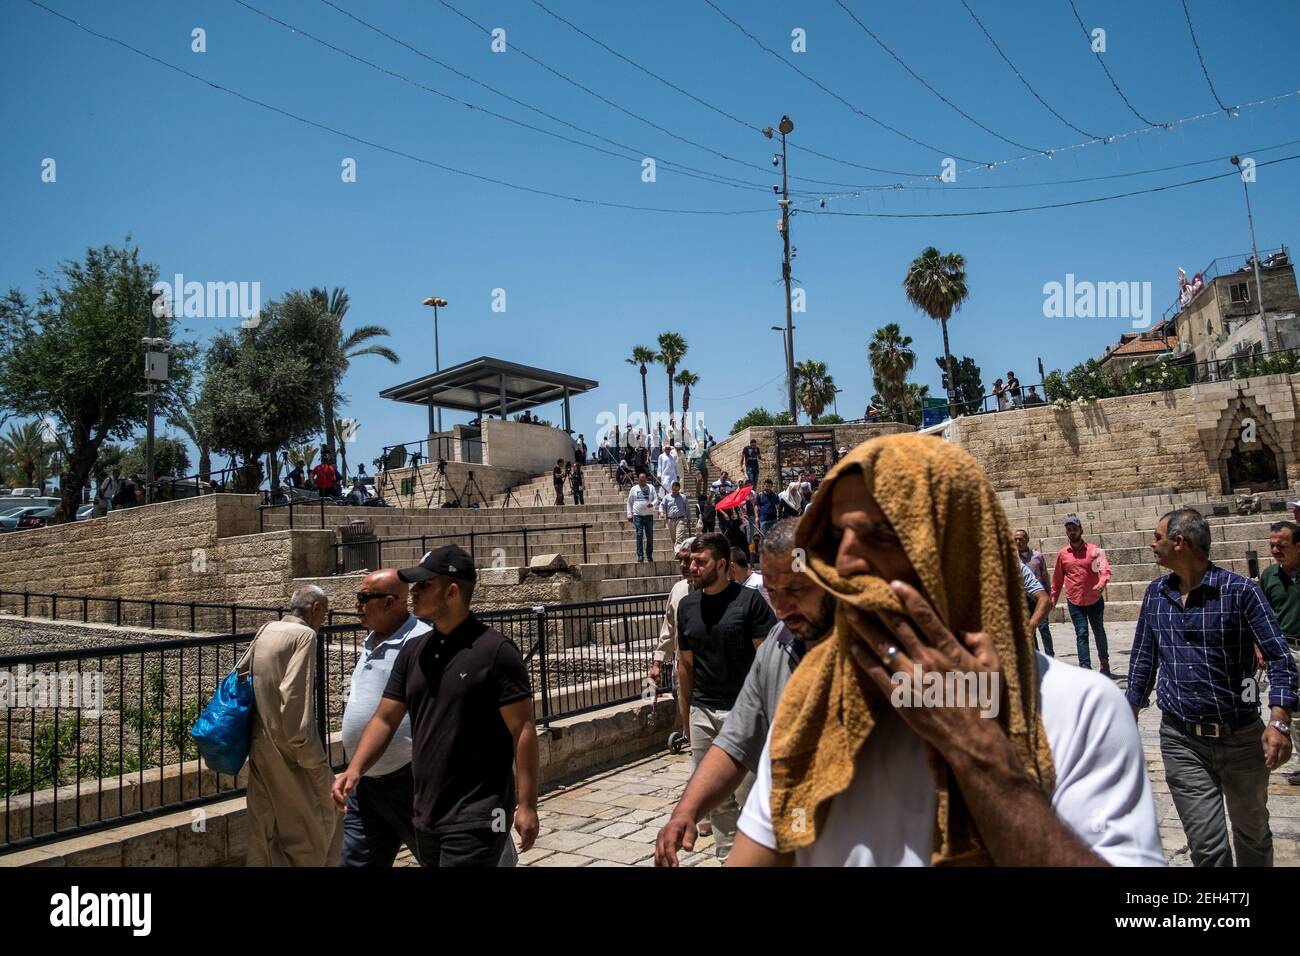 Many Muslims head towards the Damascus Gate to go to the mosque for Friday prayers. The Damascus Gate is the gateway to the Muslim quarter of the Old City. May 18, 2018. Jerusalem. Israel. Stock Photo